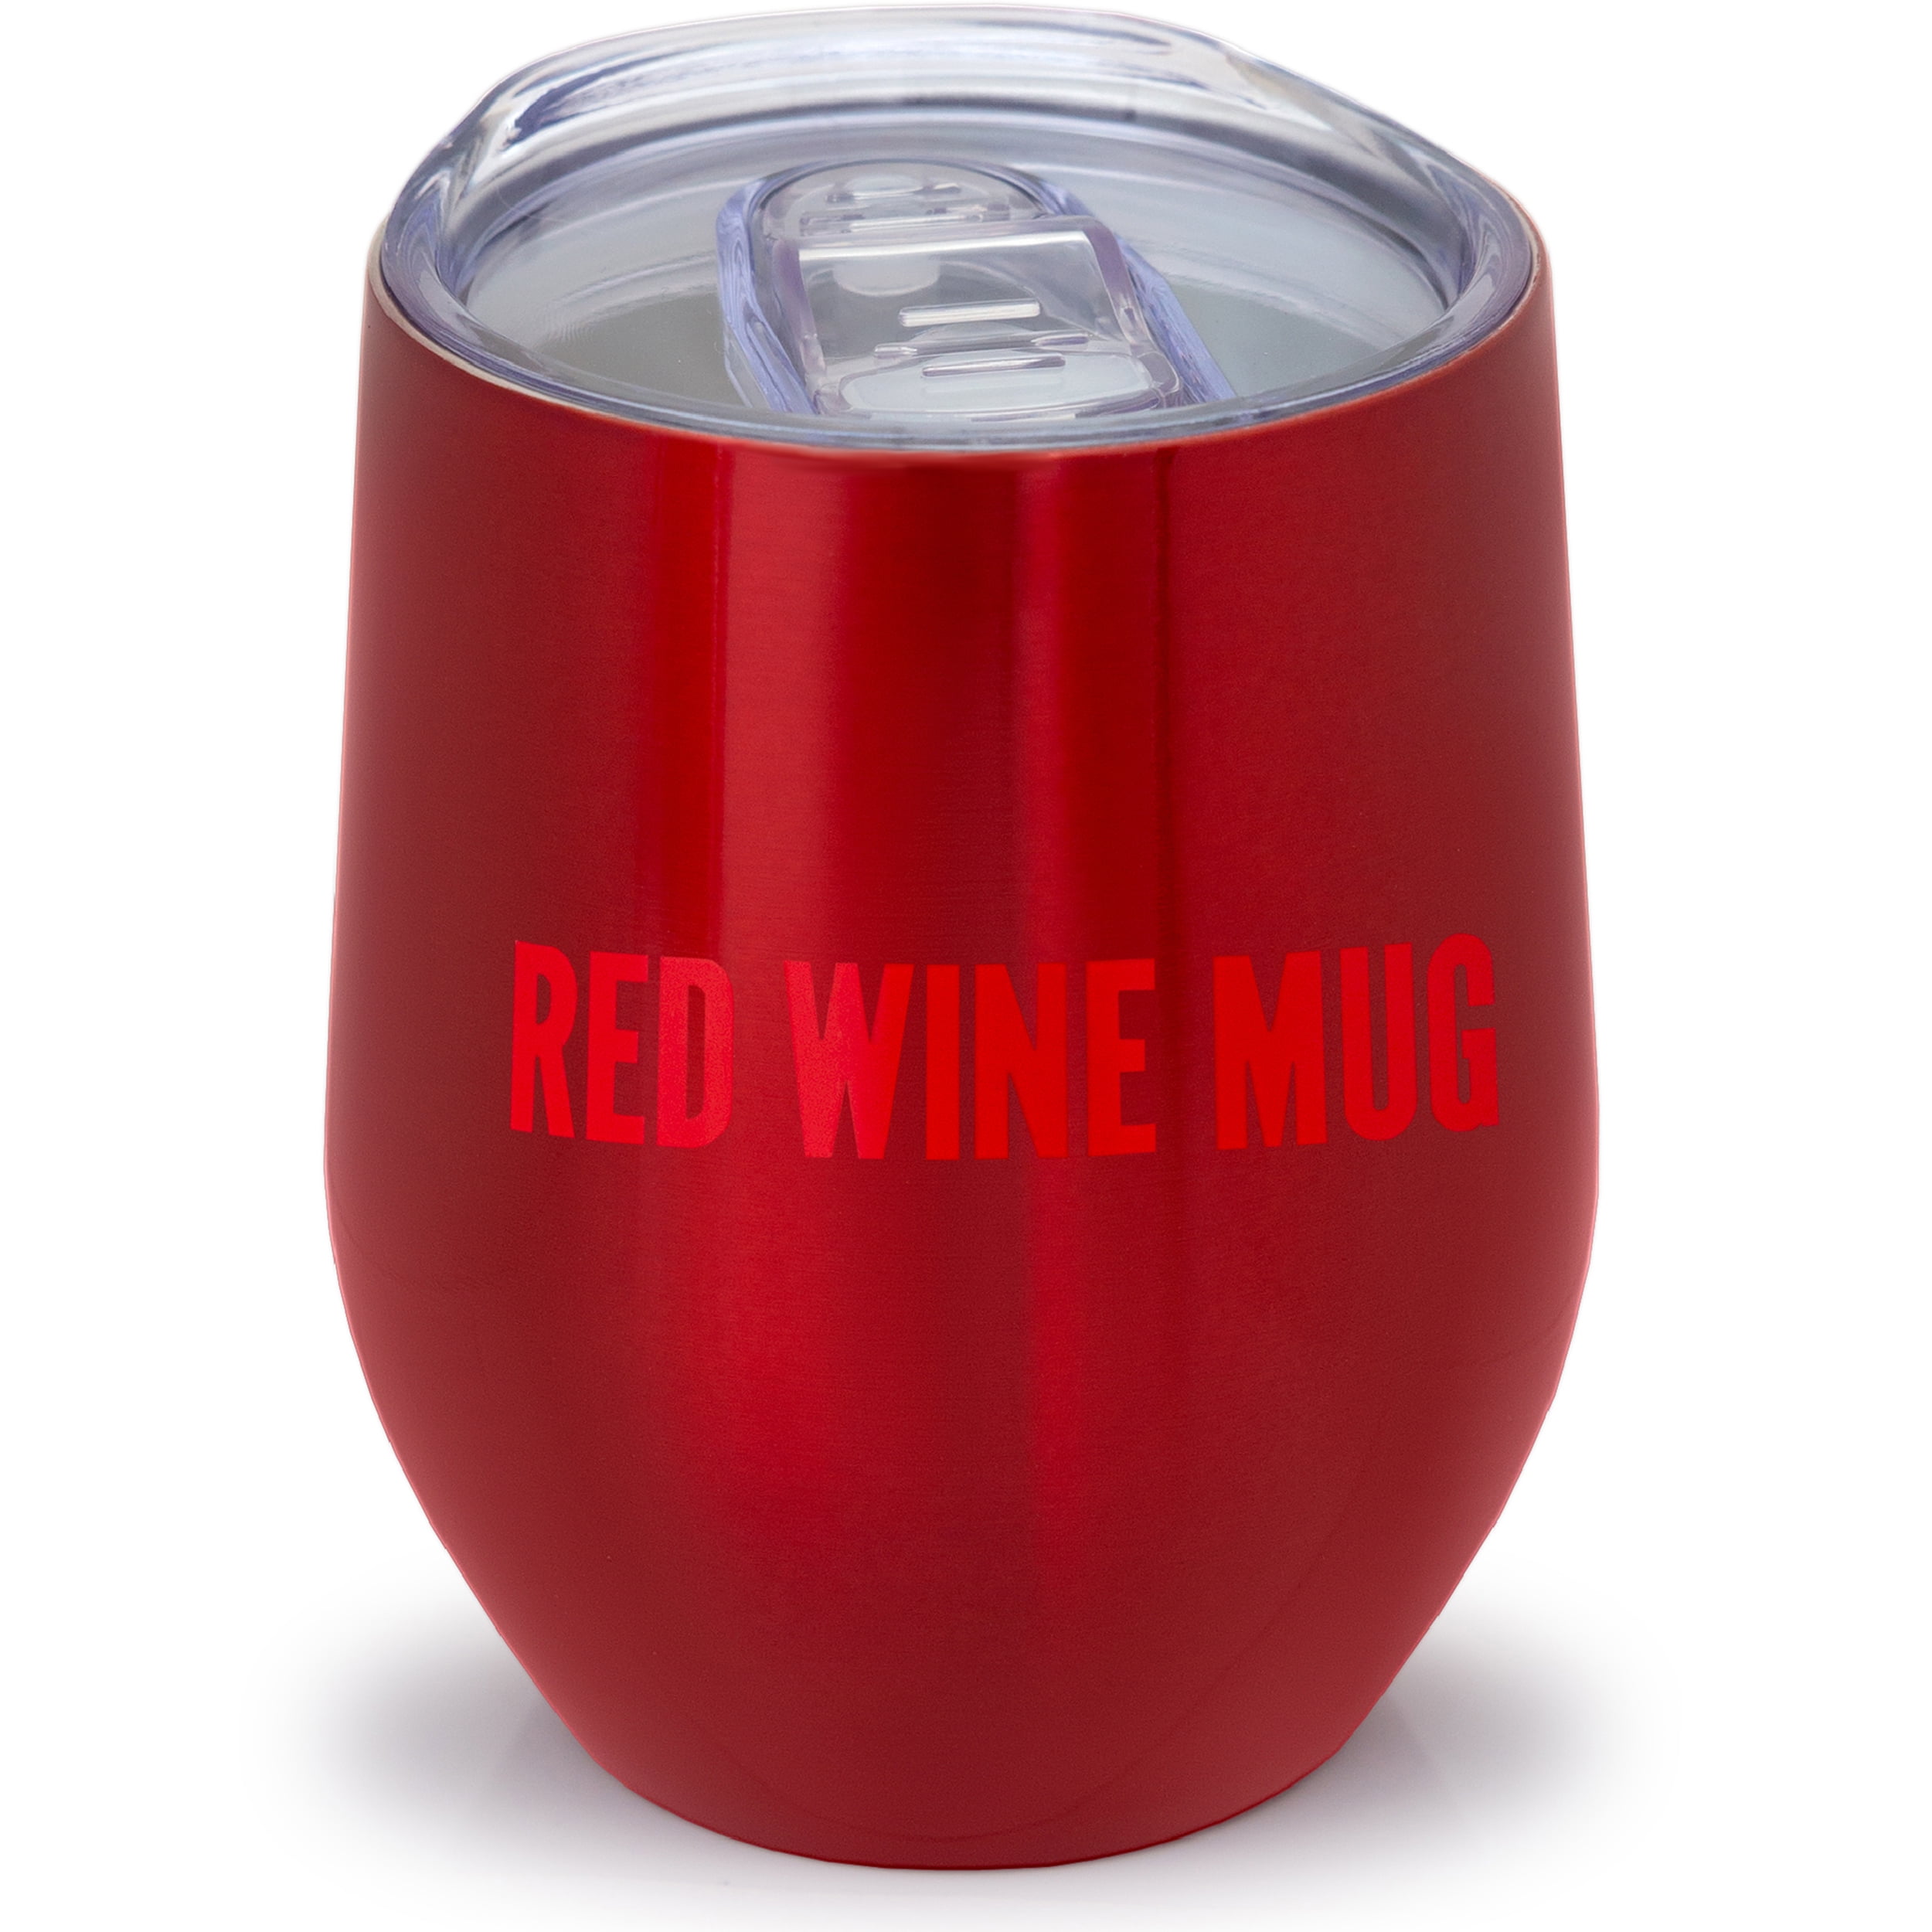 Promotional Margaux 12 oz Vacuum Insulated Stemless Wine Glass $13.72